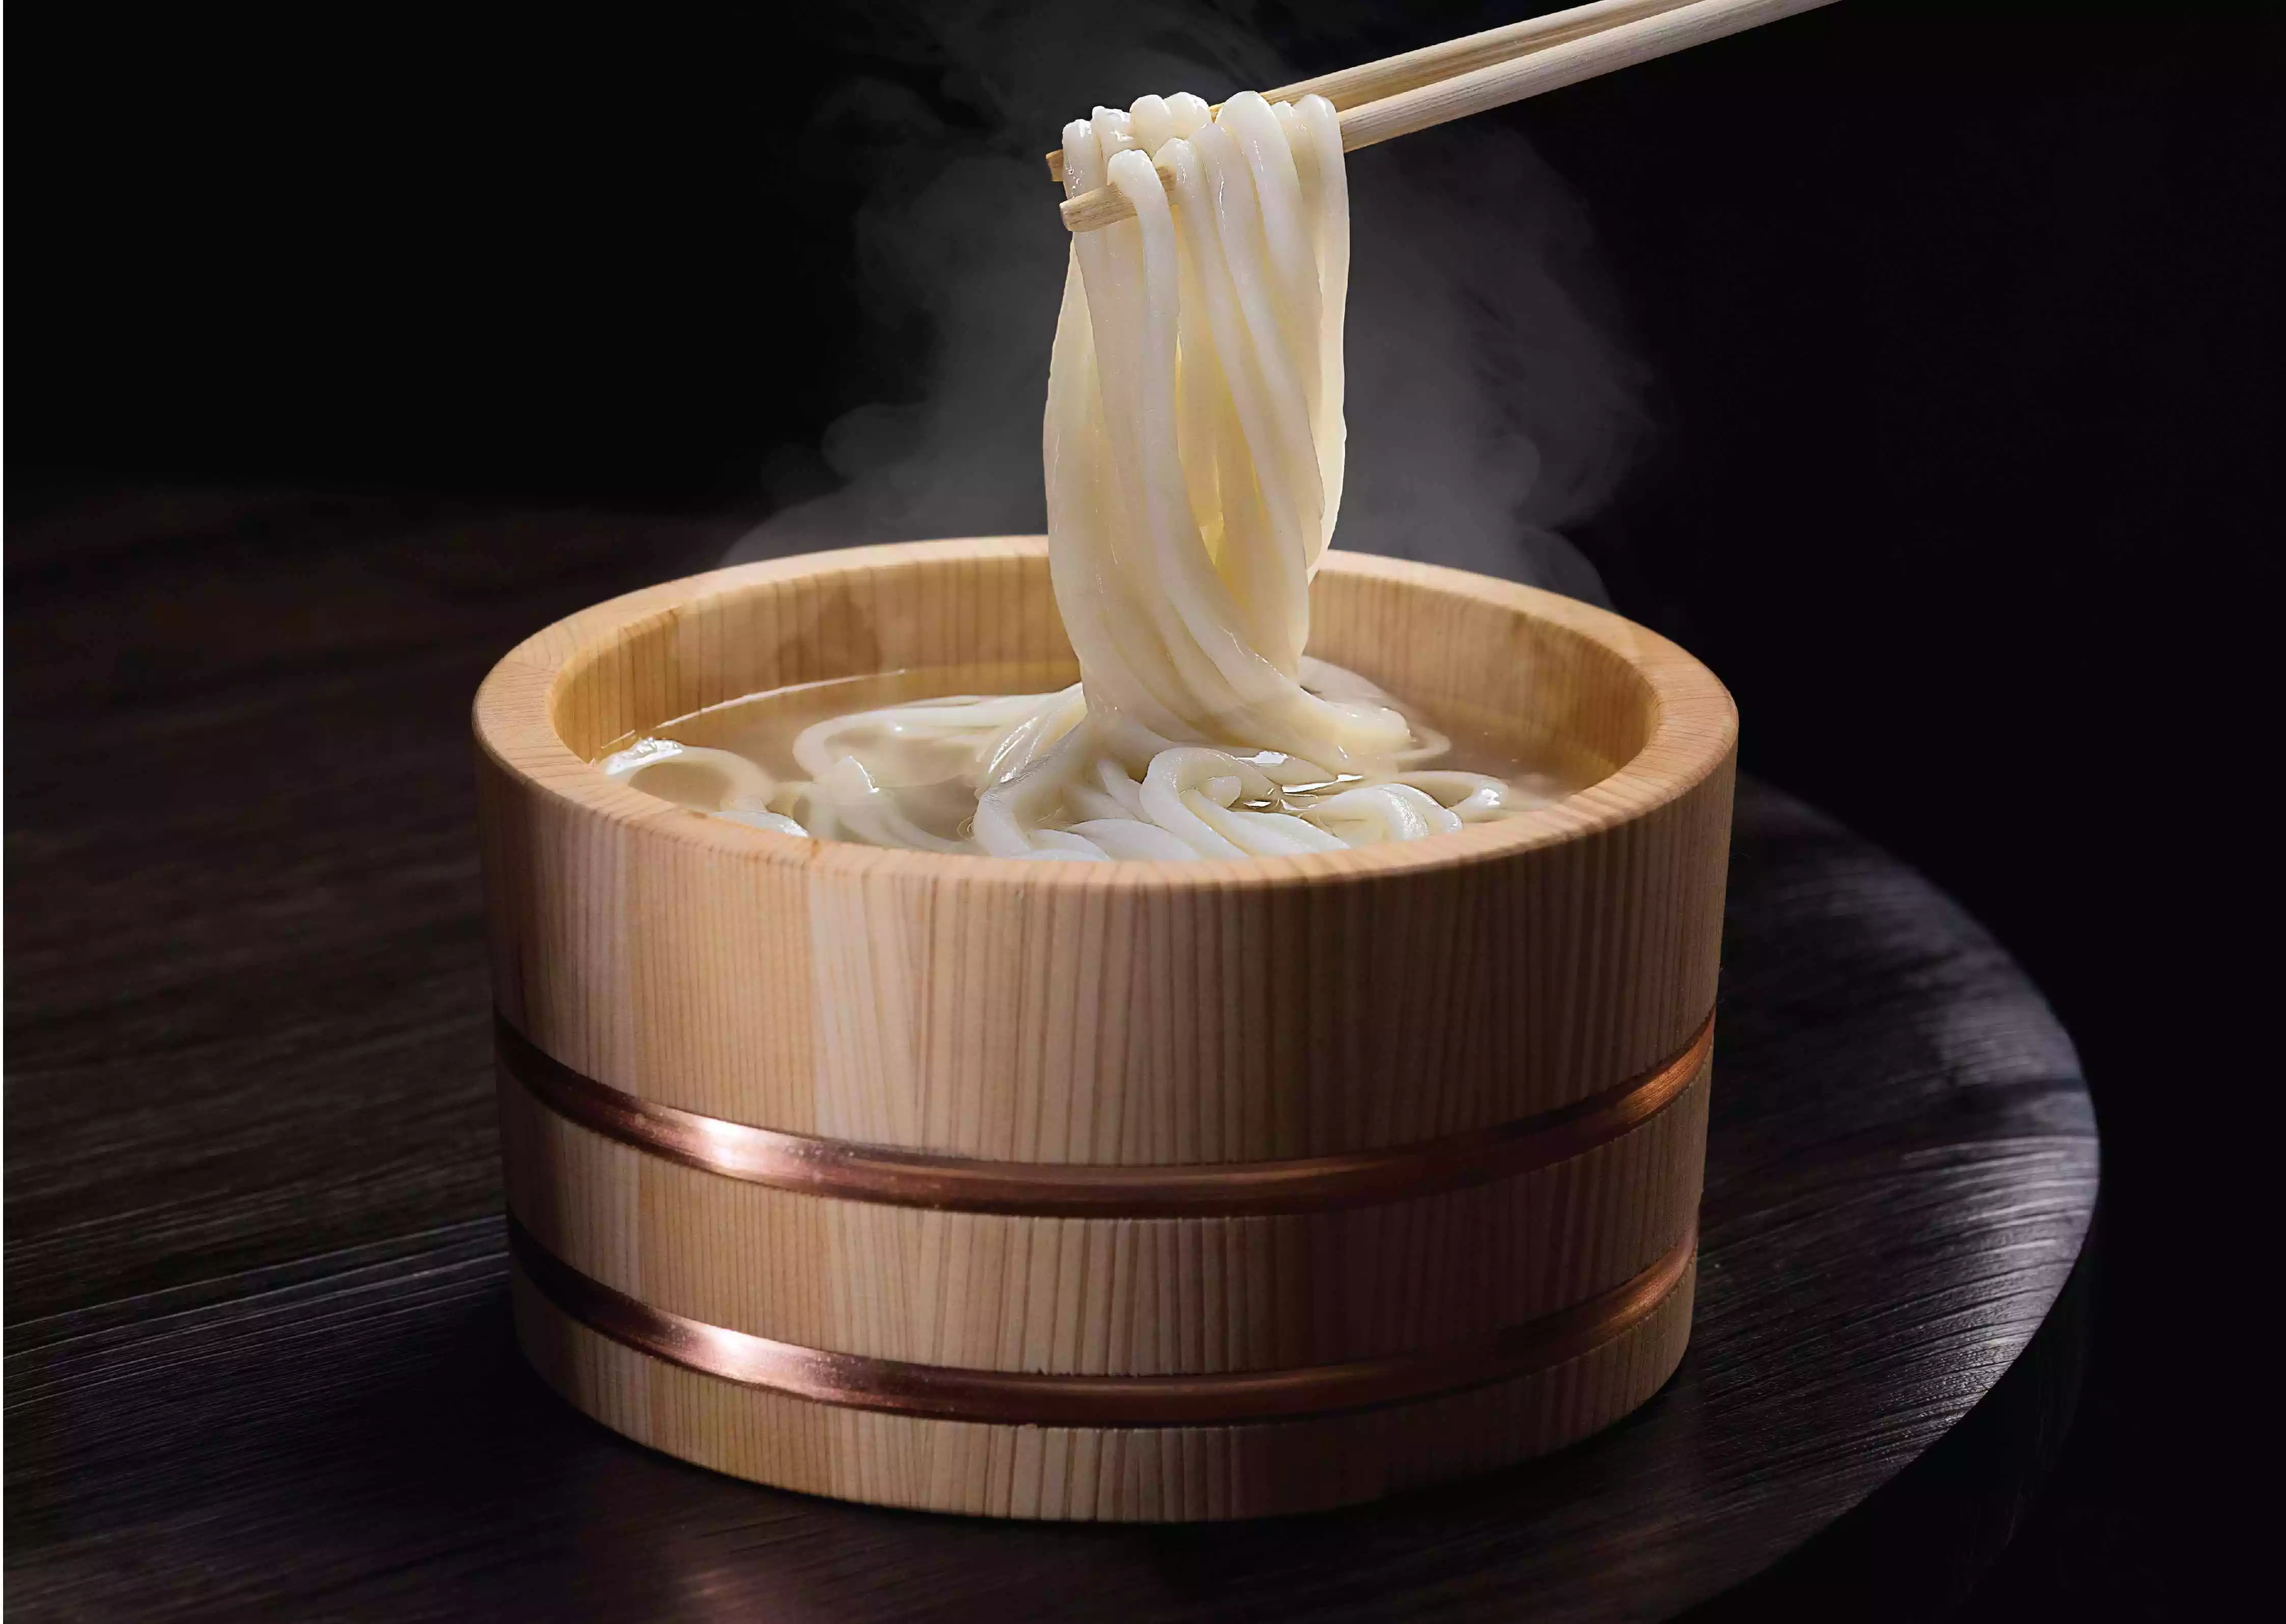 Marugame Udon is a popular udon restaurant in Indonesia